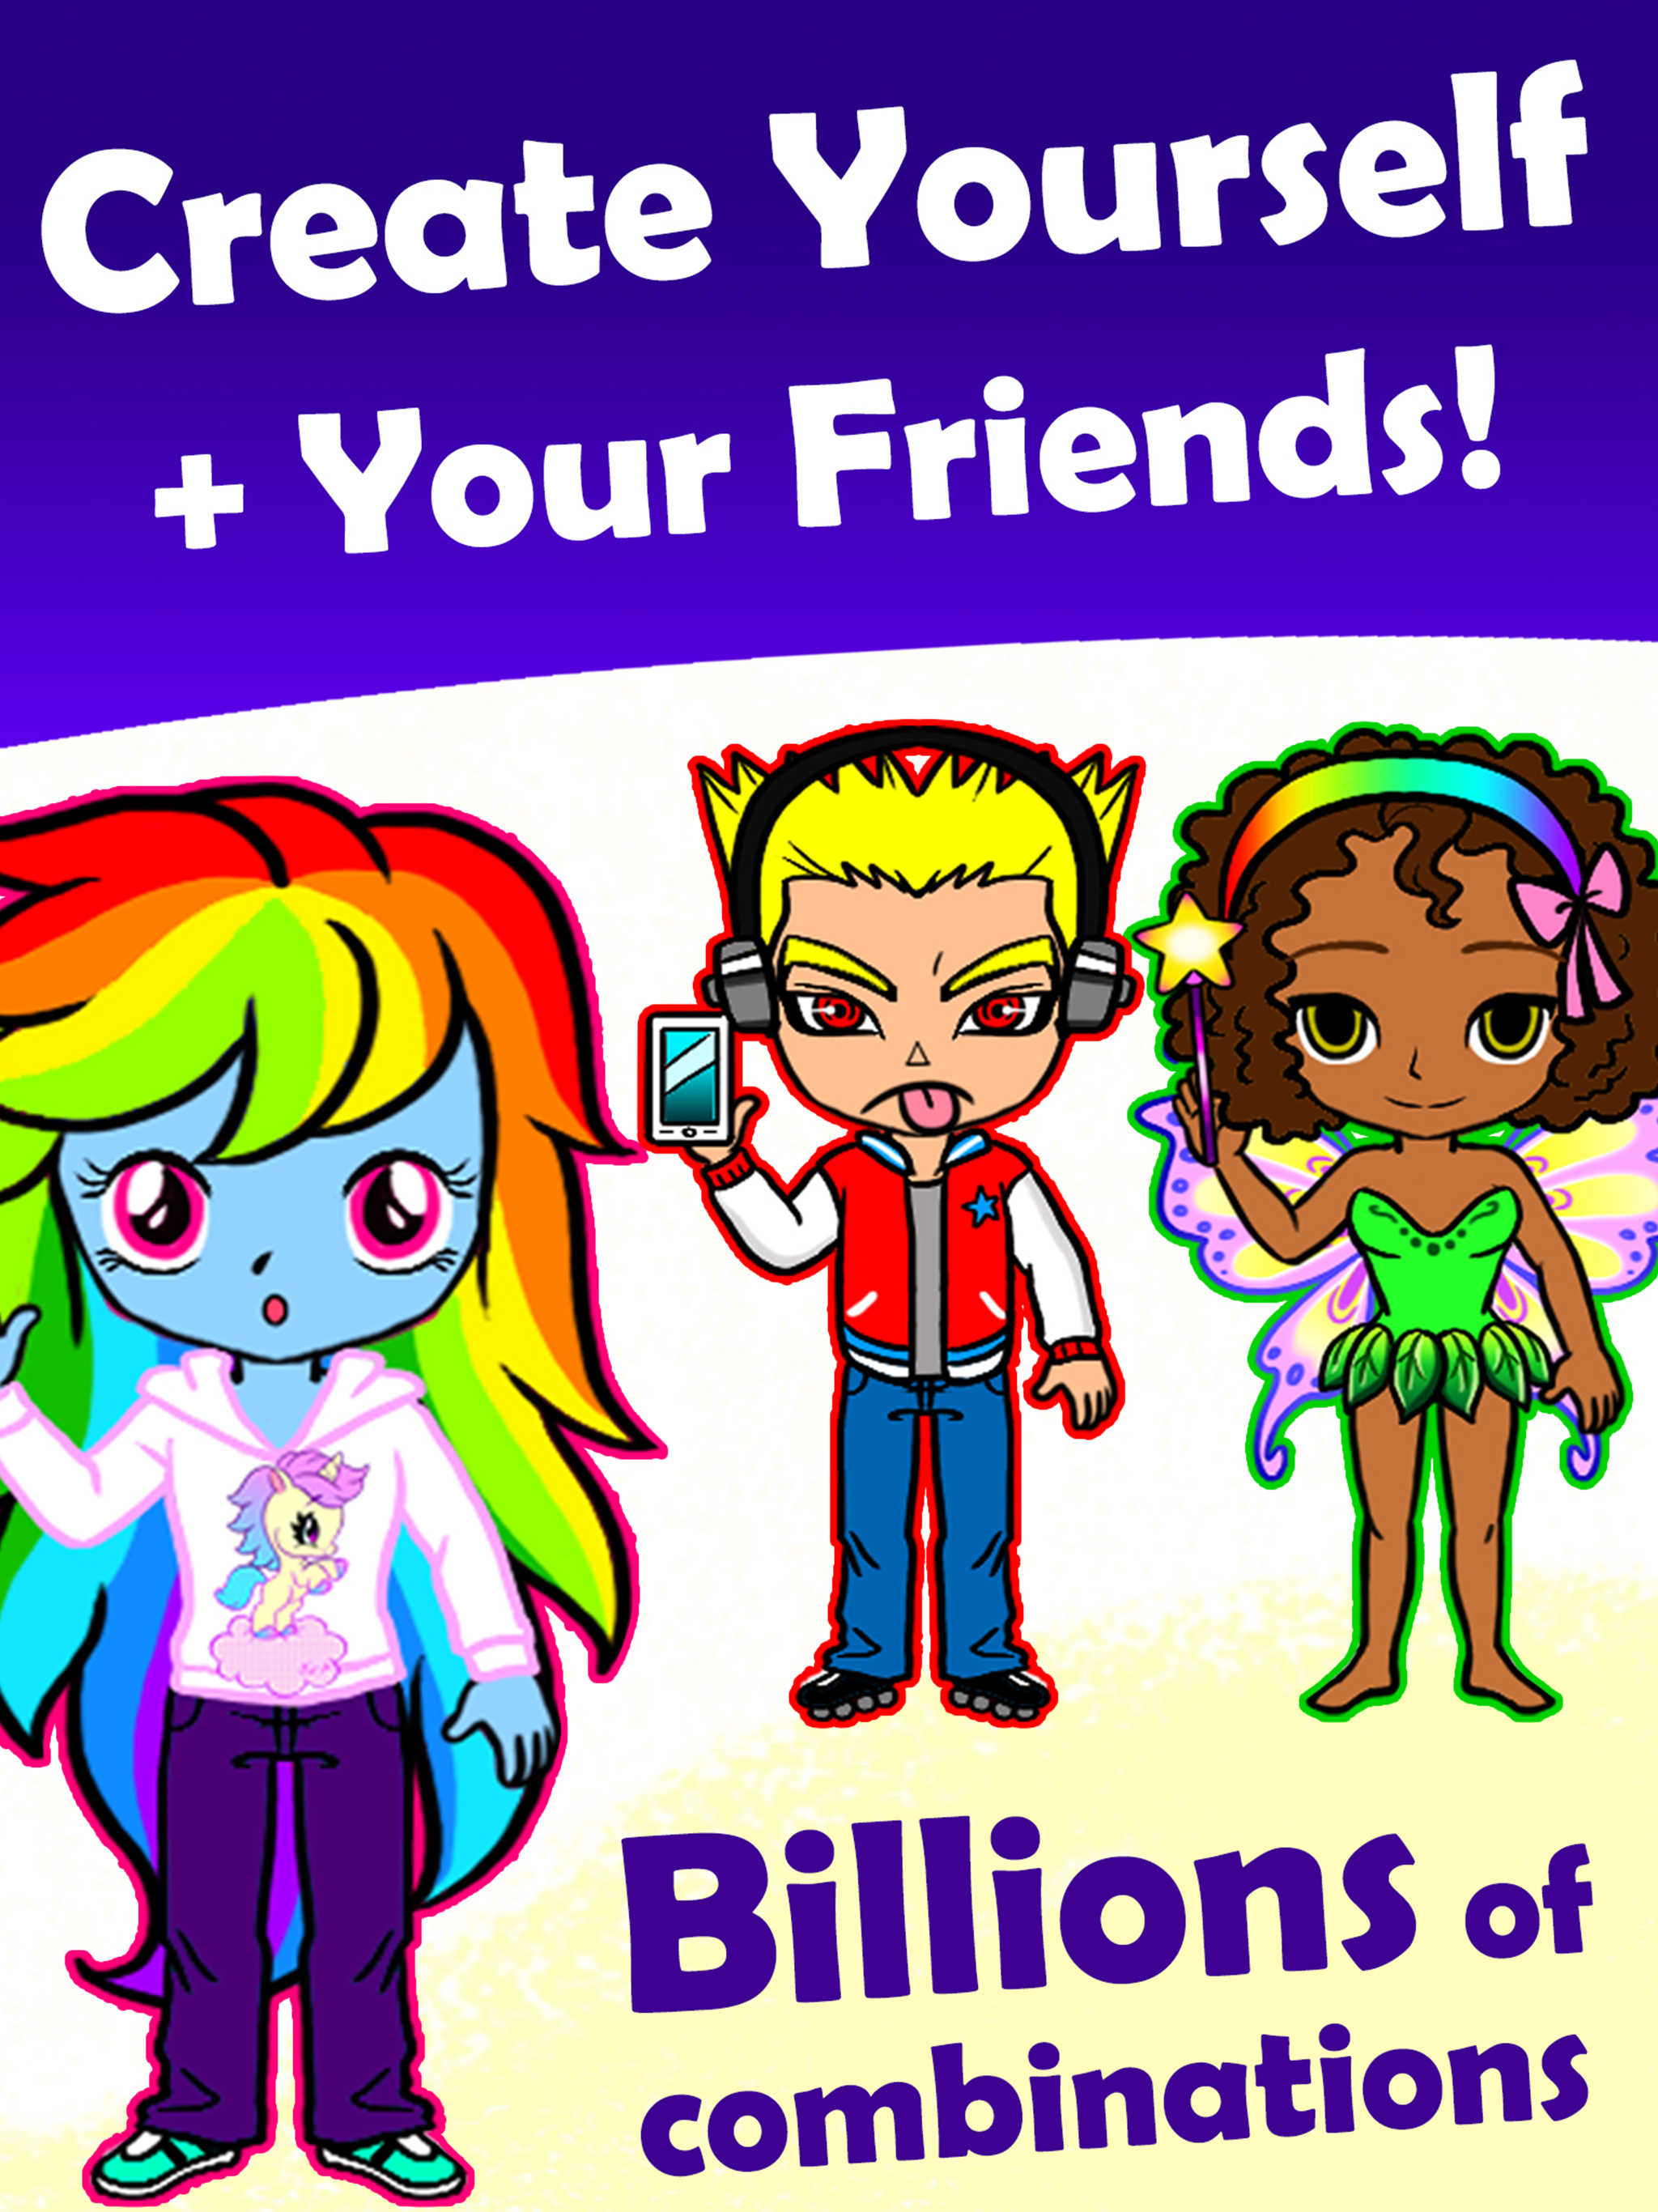 Create yourself or your friends - billions of combinations!